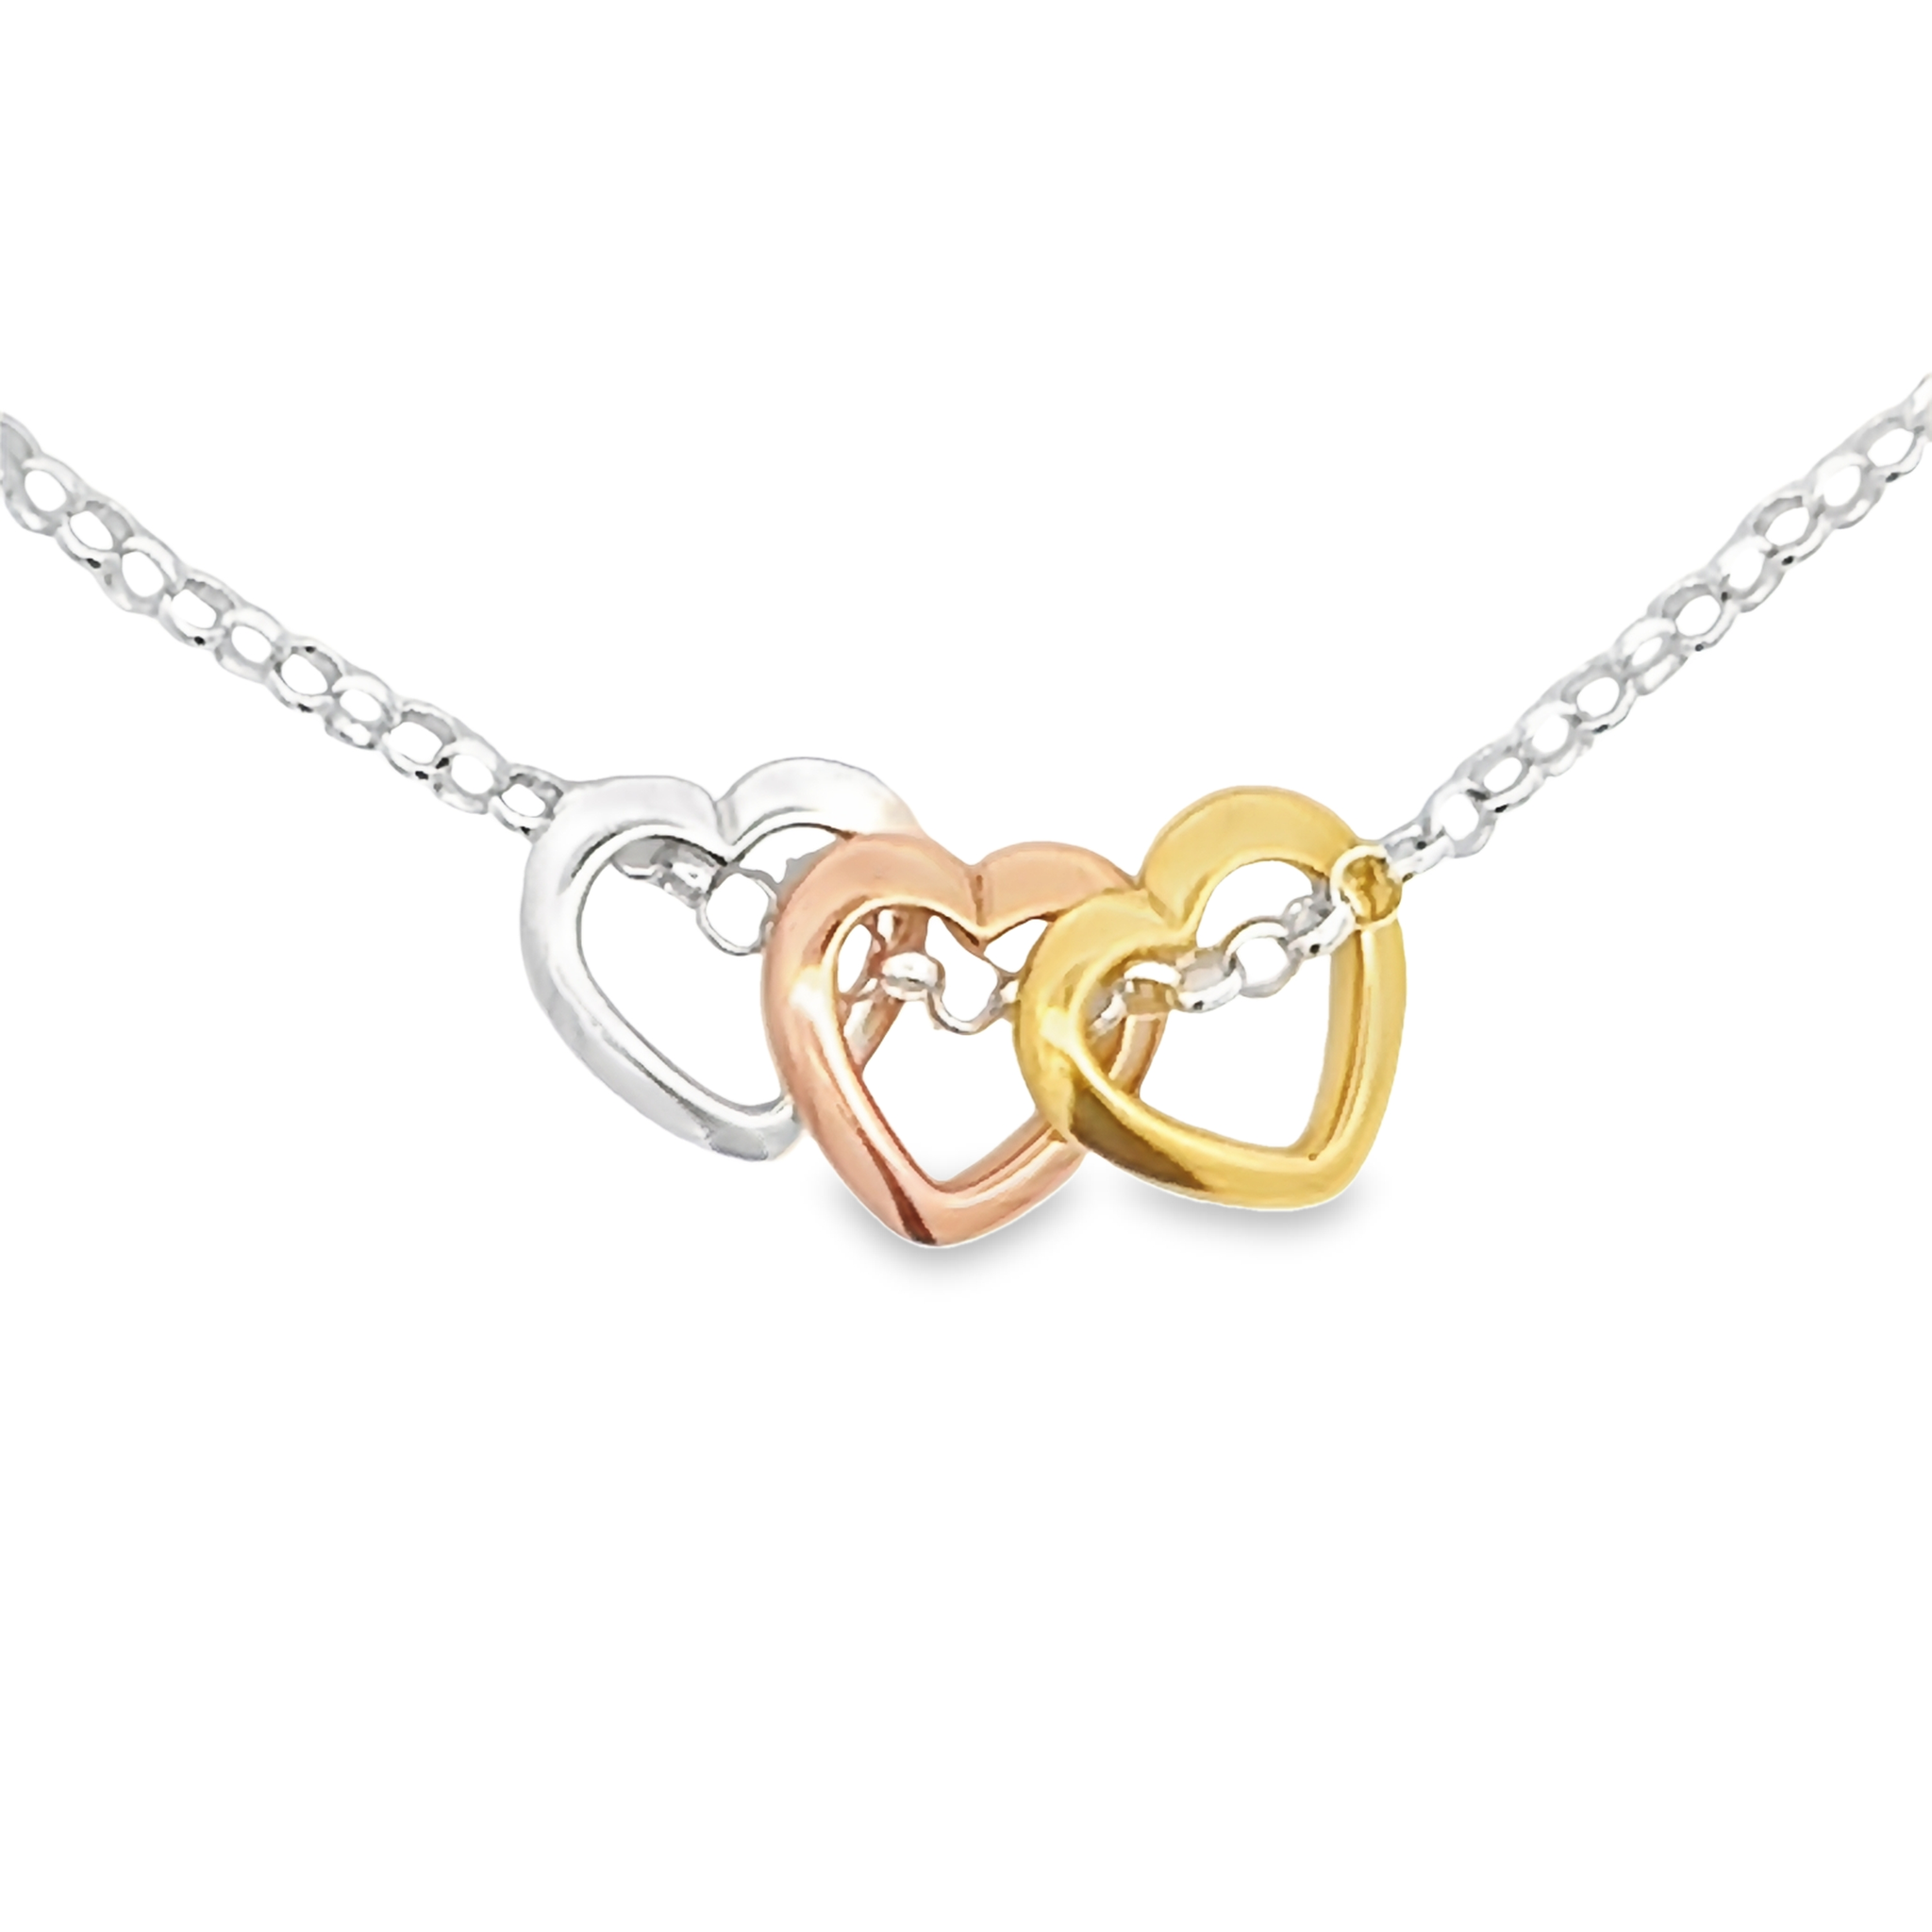 Tri-colored Sterling Silver Heart Necklace